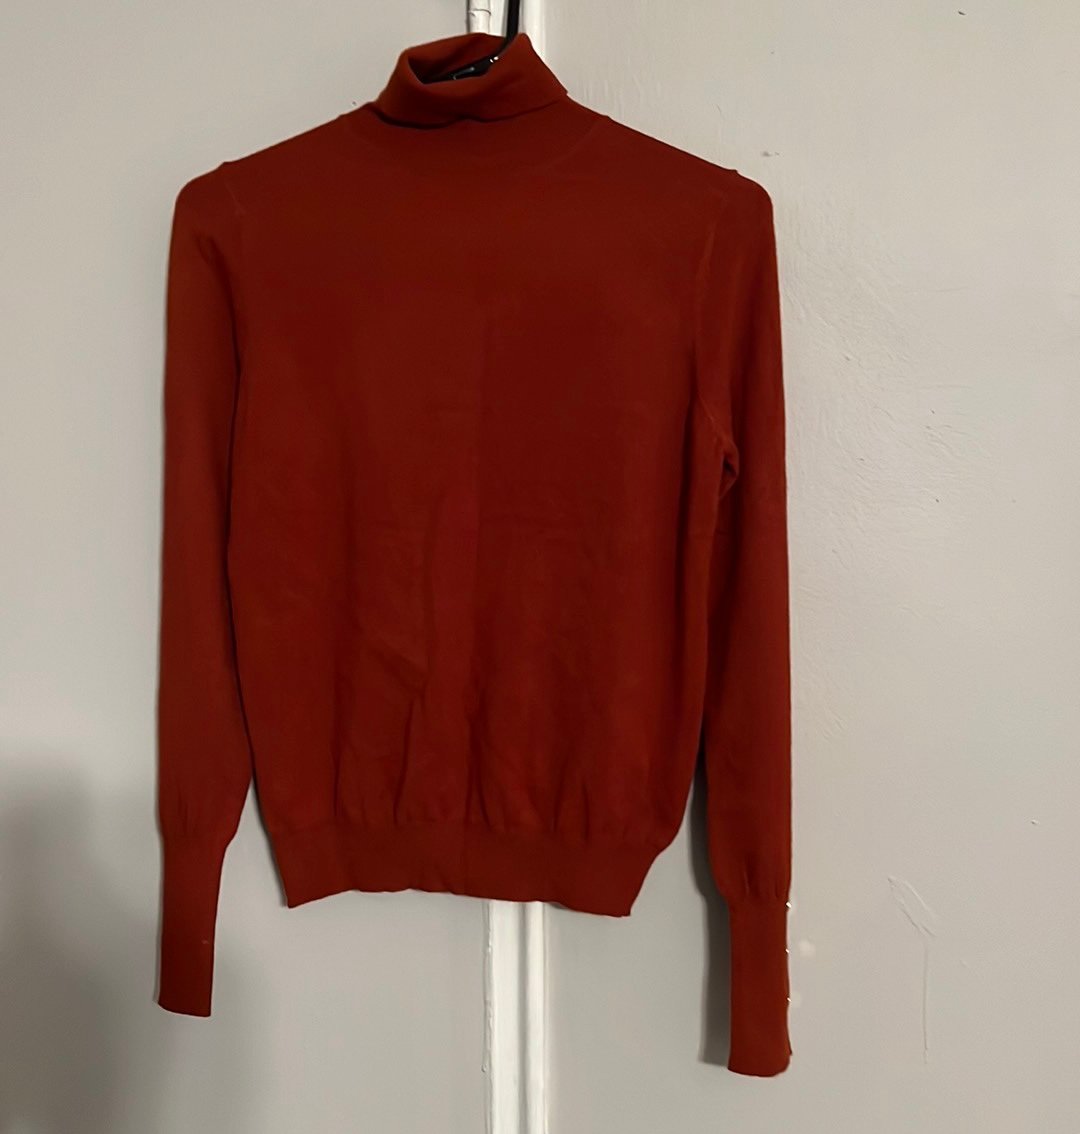 floor price NWT Rust color Turtleneck g4J3rom31 Outlet 